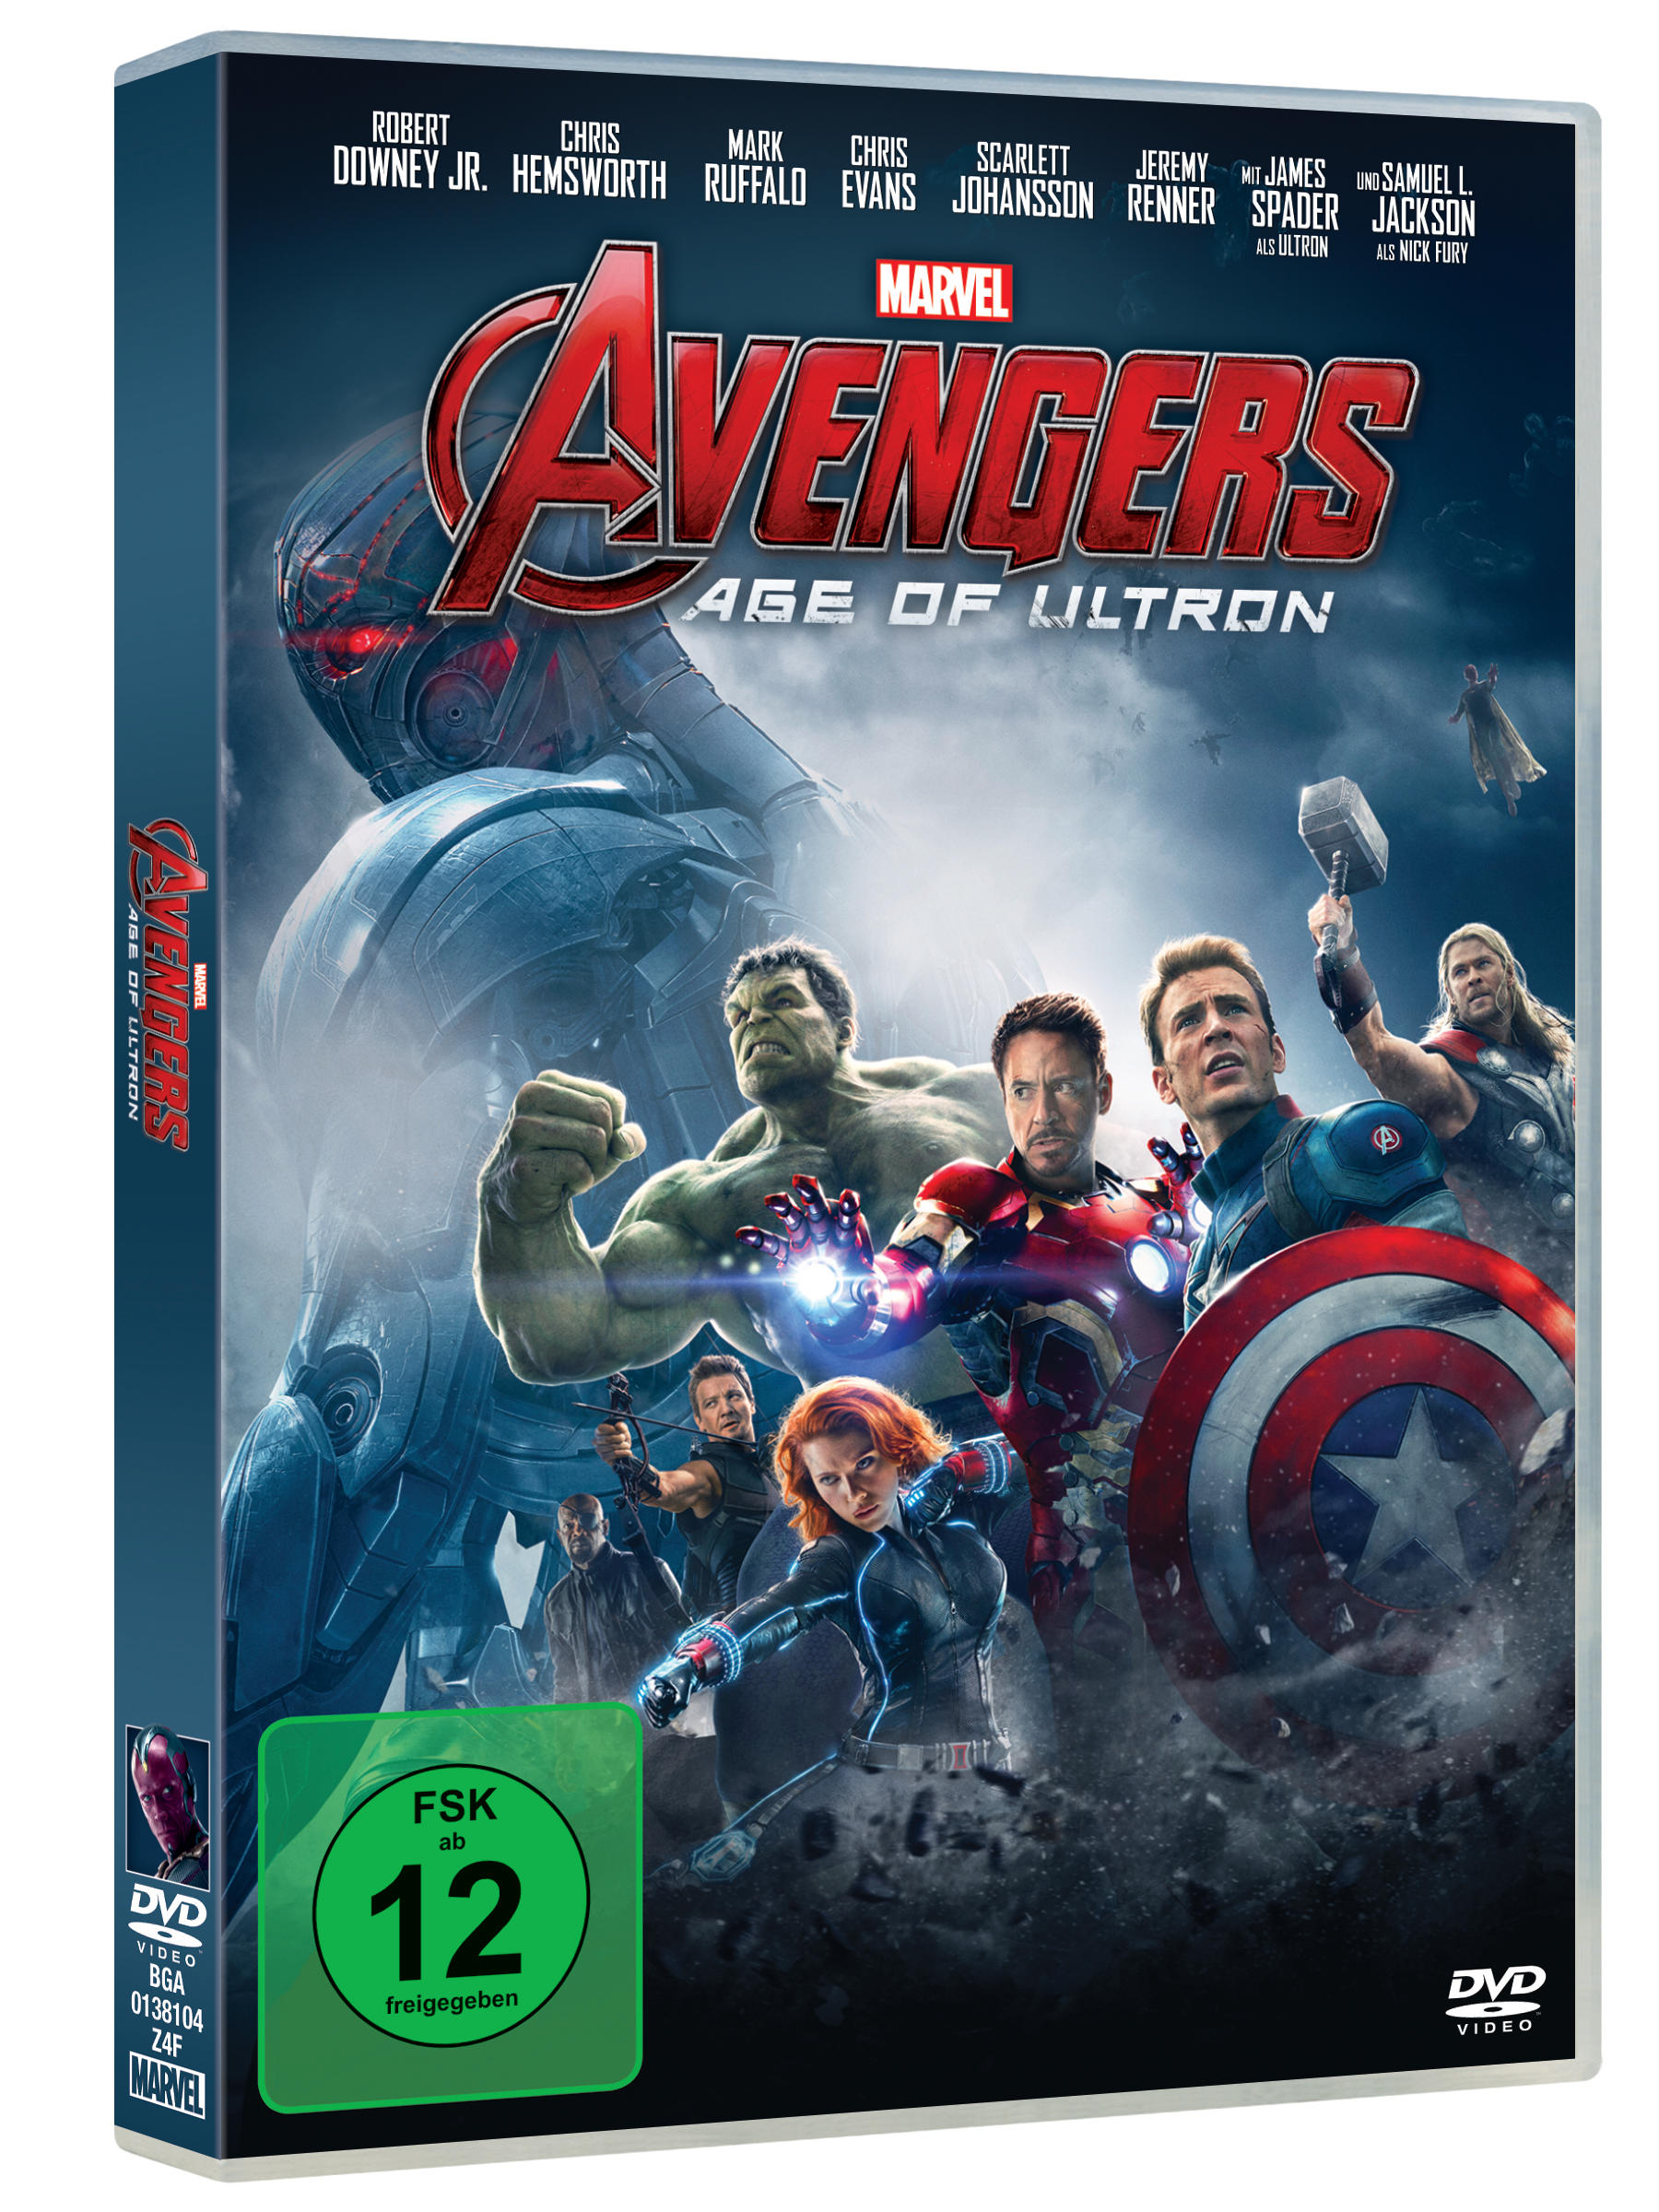 Avengers - Age of Ultron DVD Cover